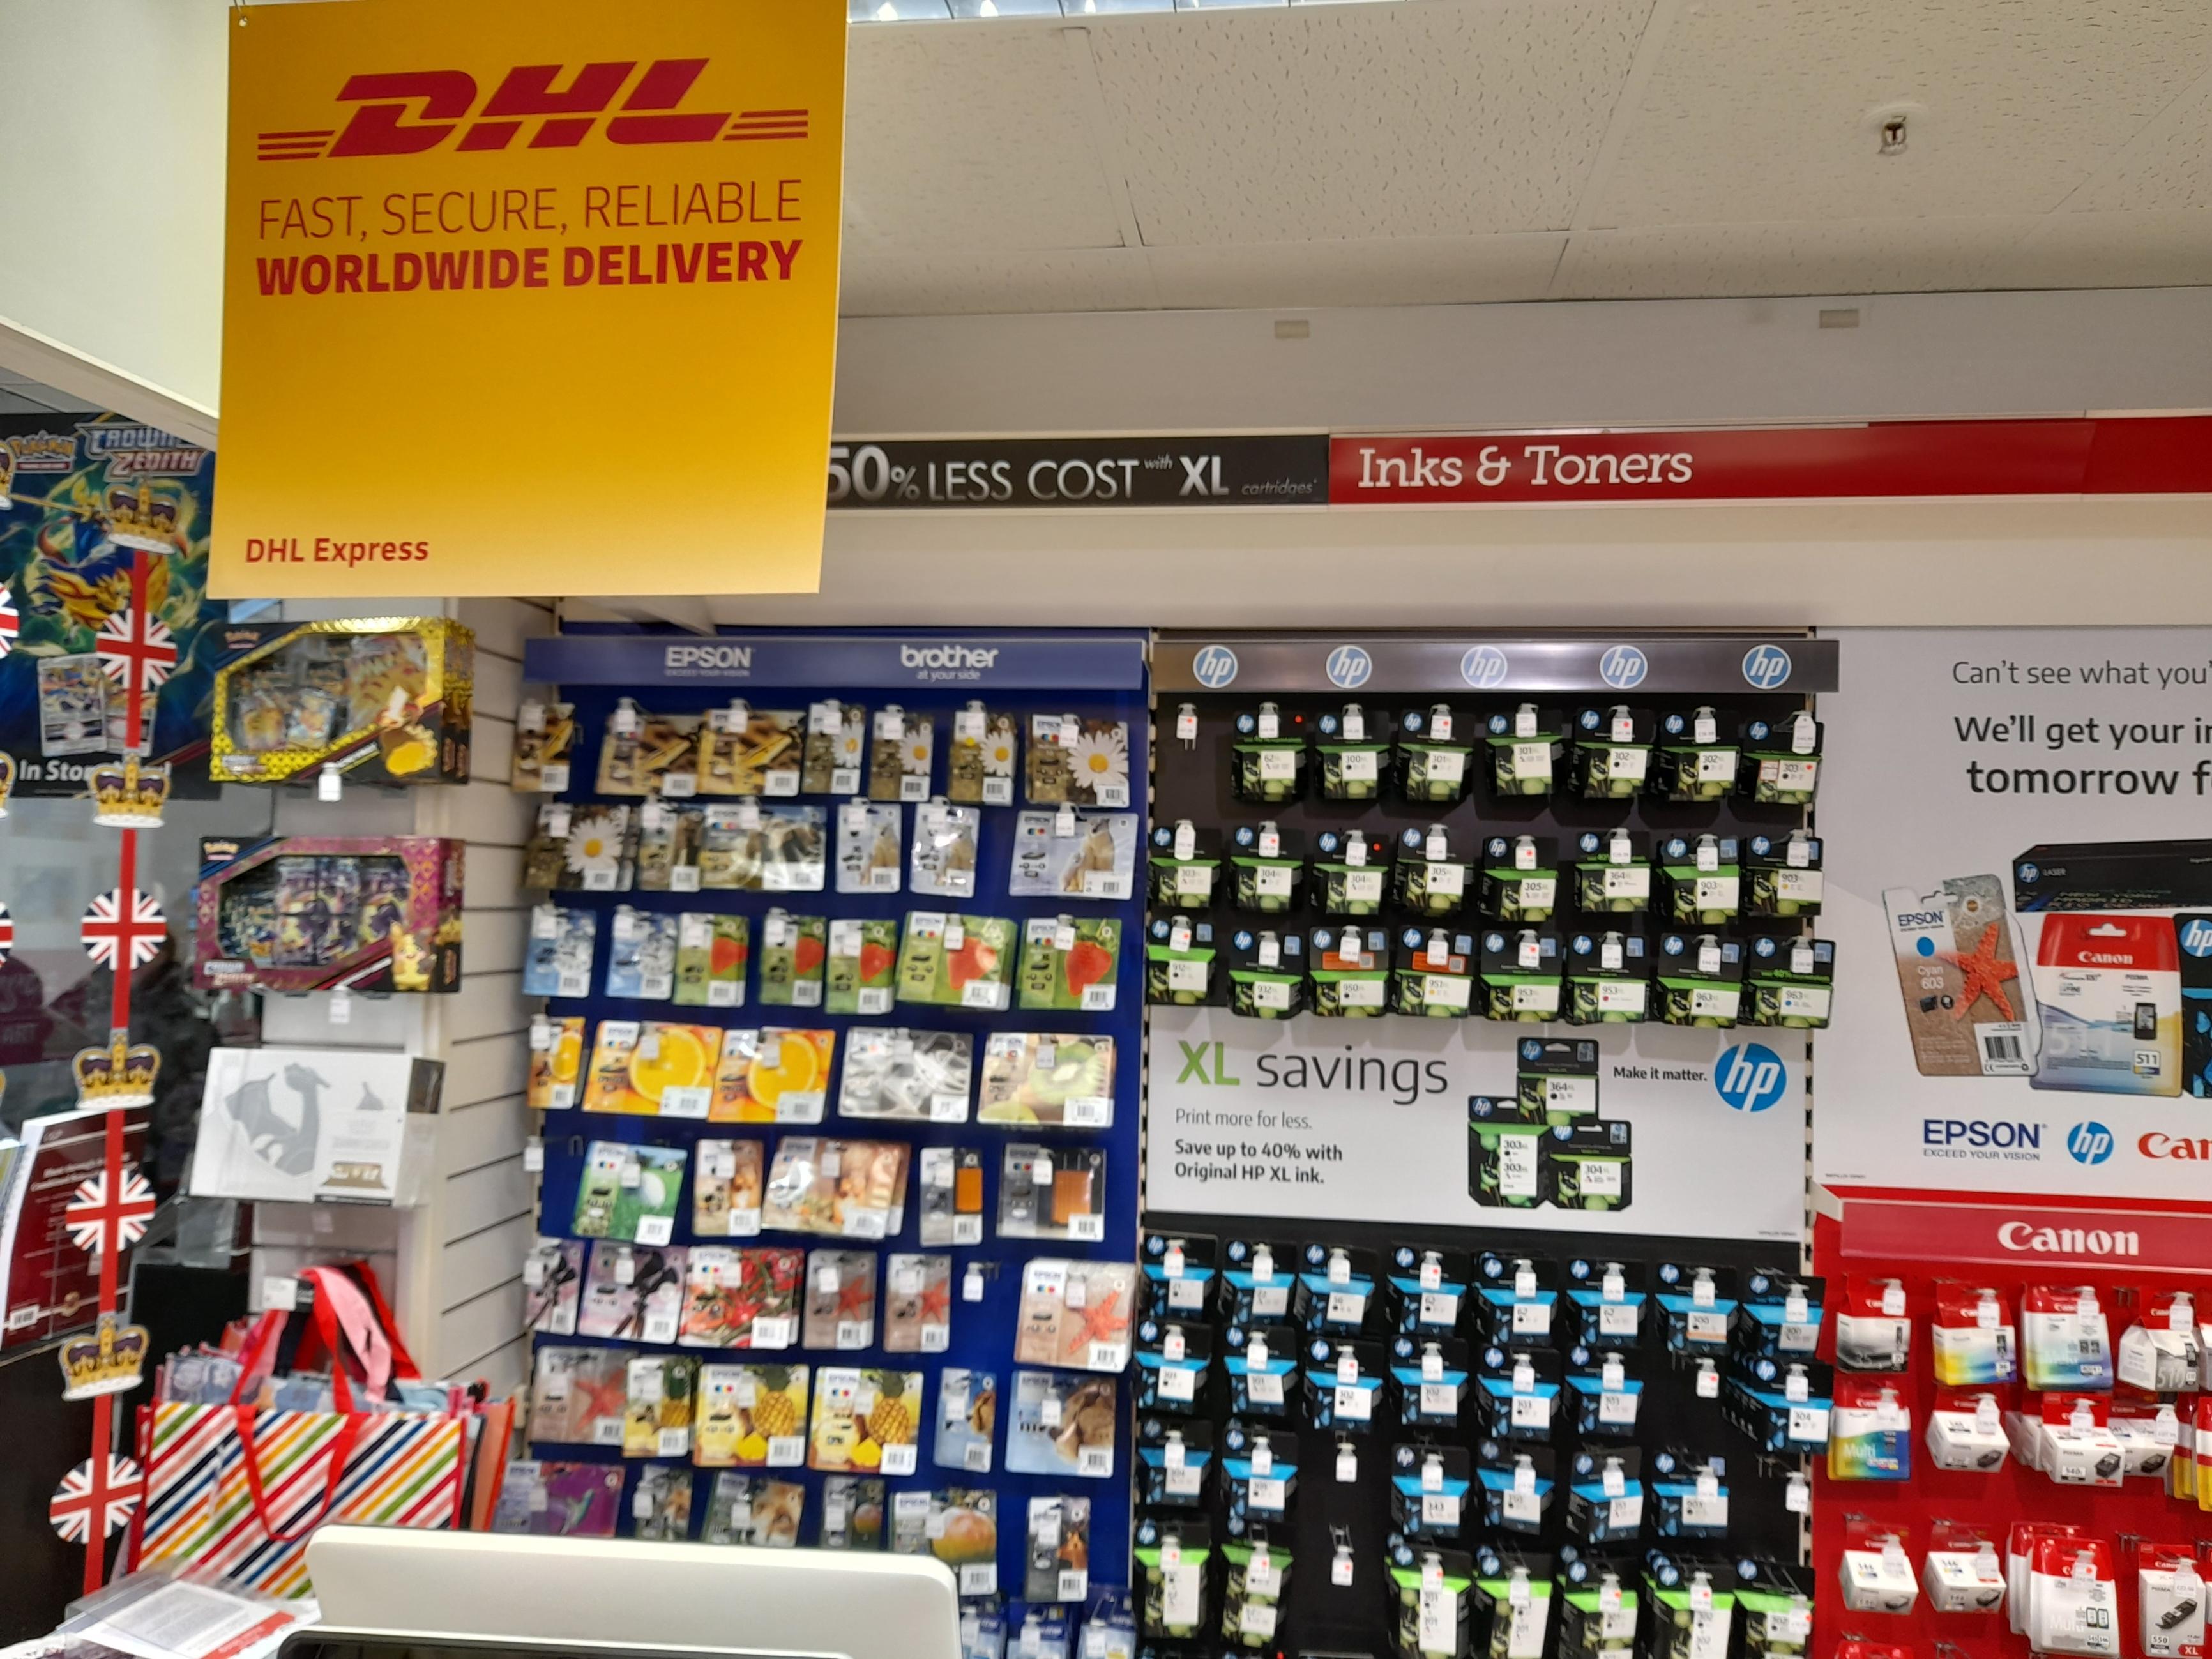 Images DHL Express Service Point (Ryman Merryhill)